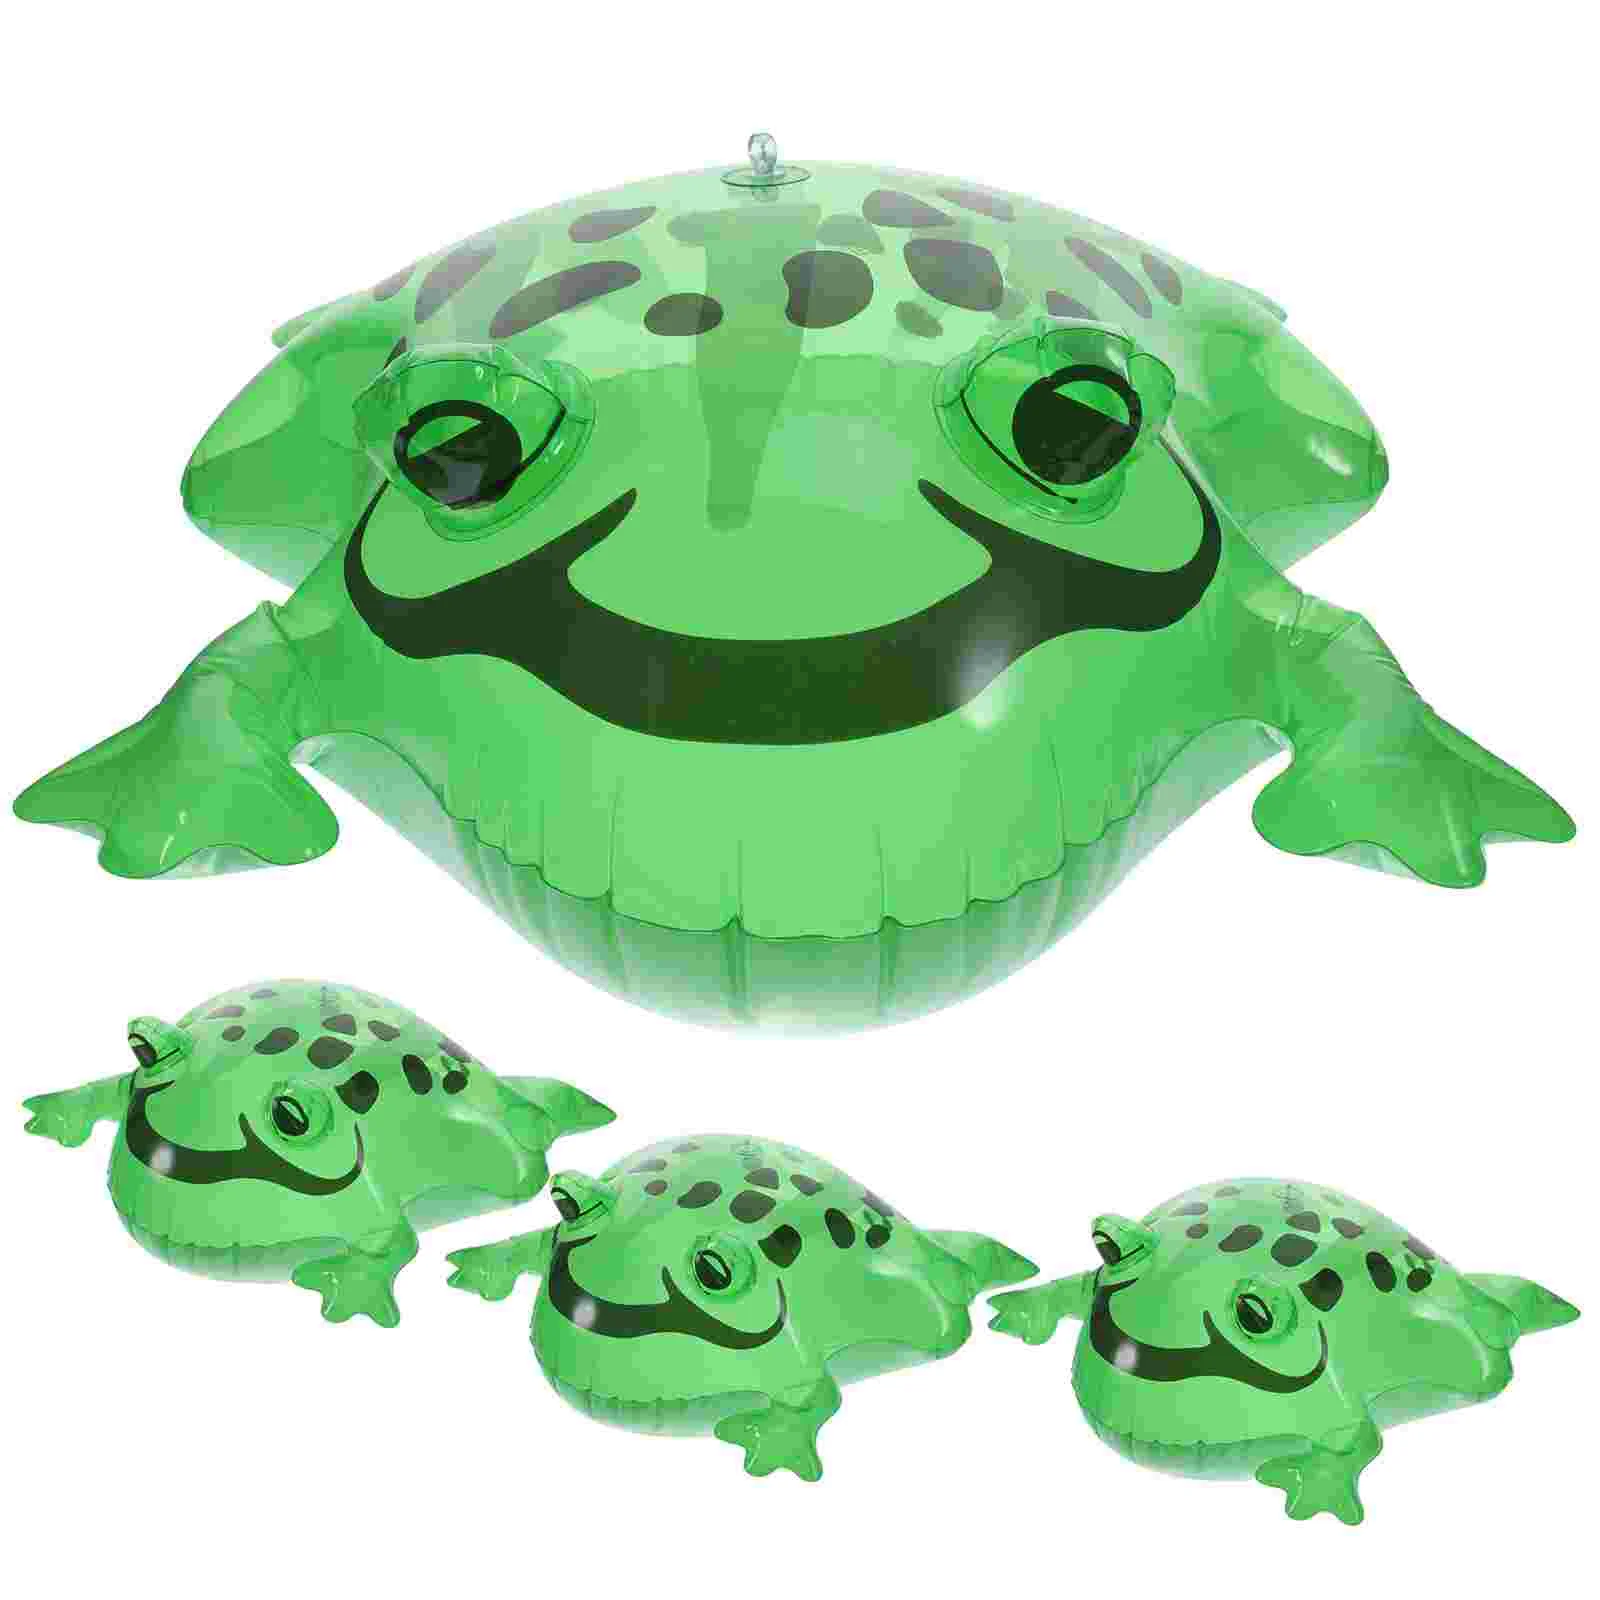 

4 Set Inflatable Frog Balloon Animals Plaything Decor Green Frogs Toy Balloons Party Bag Fillers Dining Toys